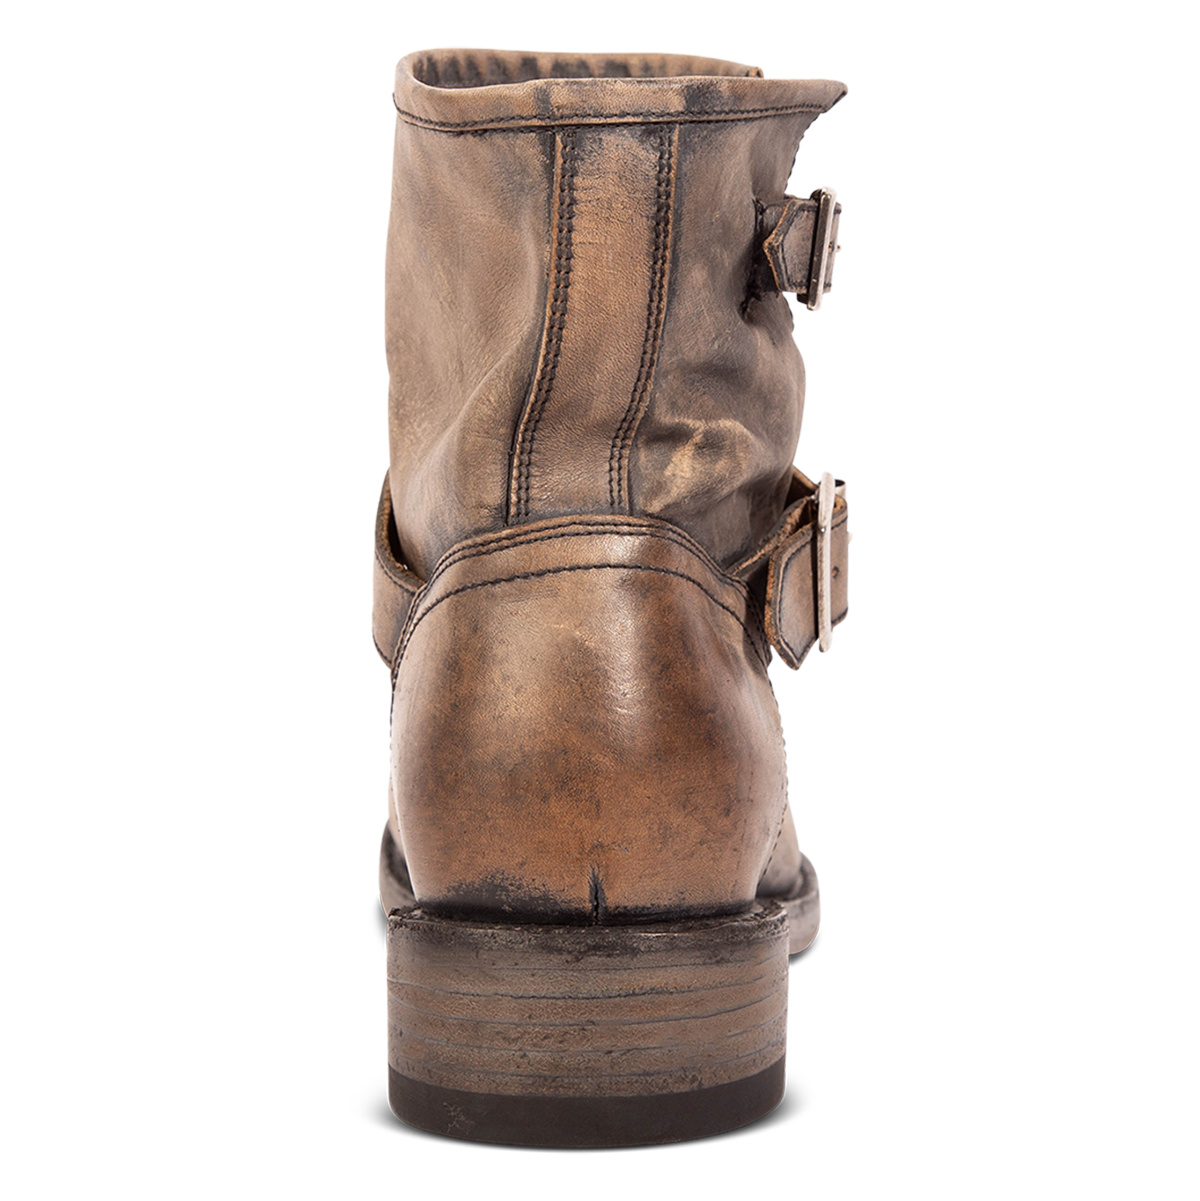 Back view showing a low block heel and dual leather straps on FREEBIRD men's Charles stone leather boot